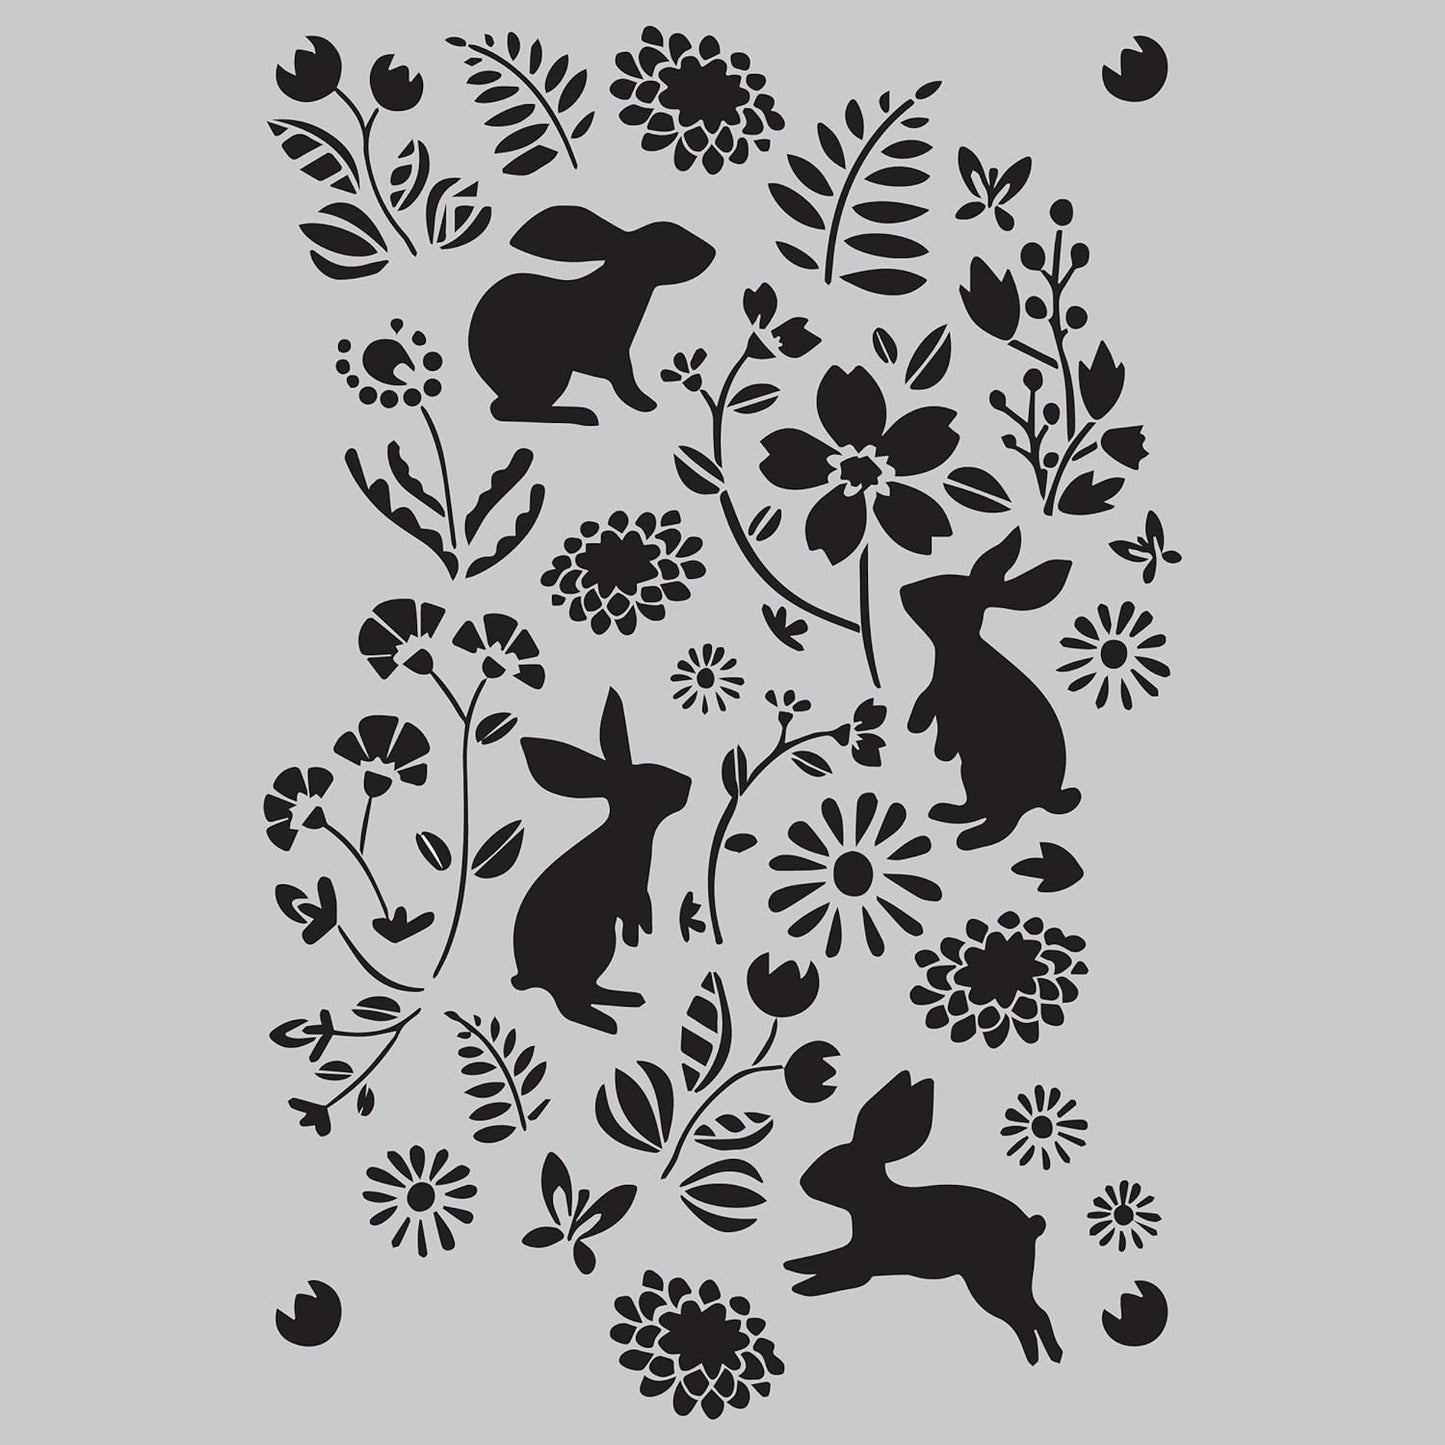 Latest Bunny Hop Kids Room Wall Stencil -Pack of 1, Sheet Size 24 x 36 inch/Design Size 22 x 33 inch.